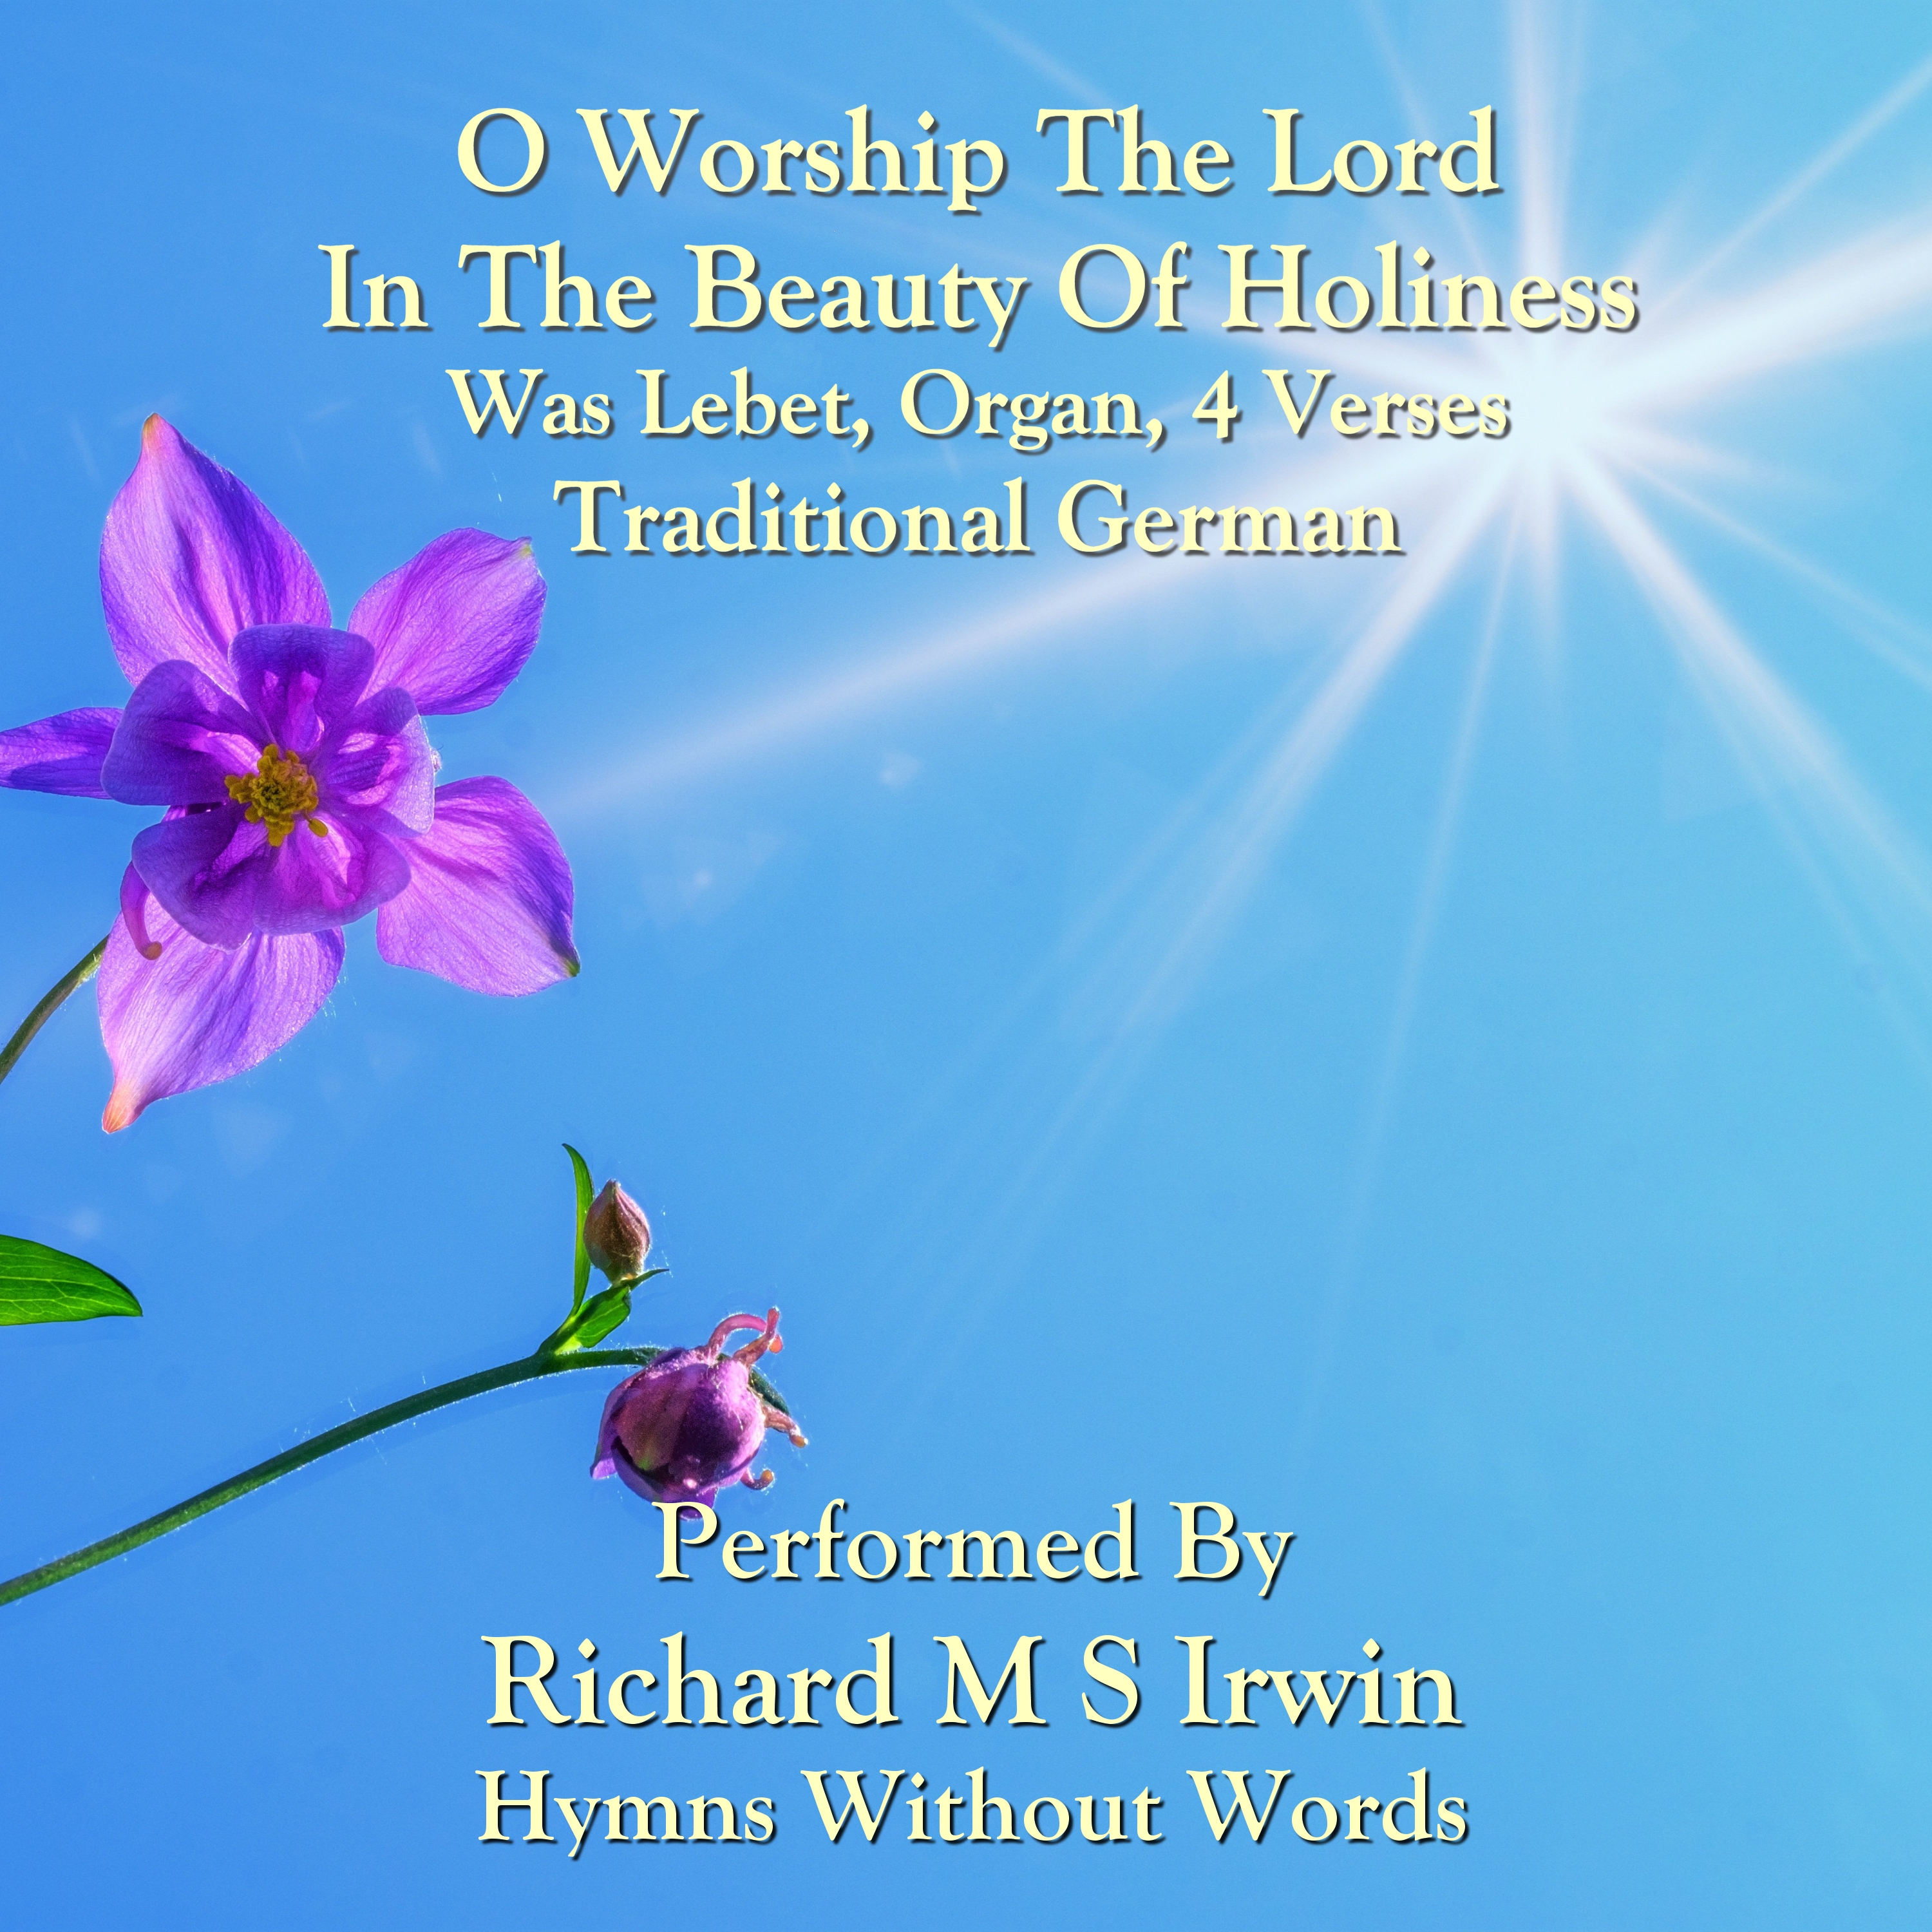 O Worship The Lord In The Beauty Of Holiness